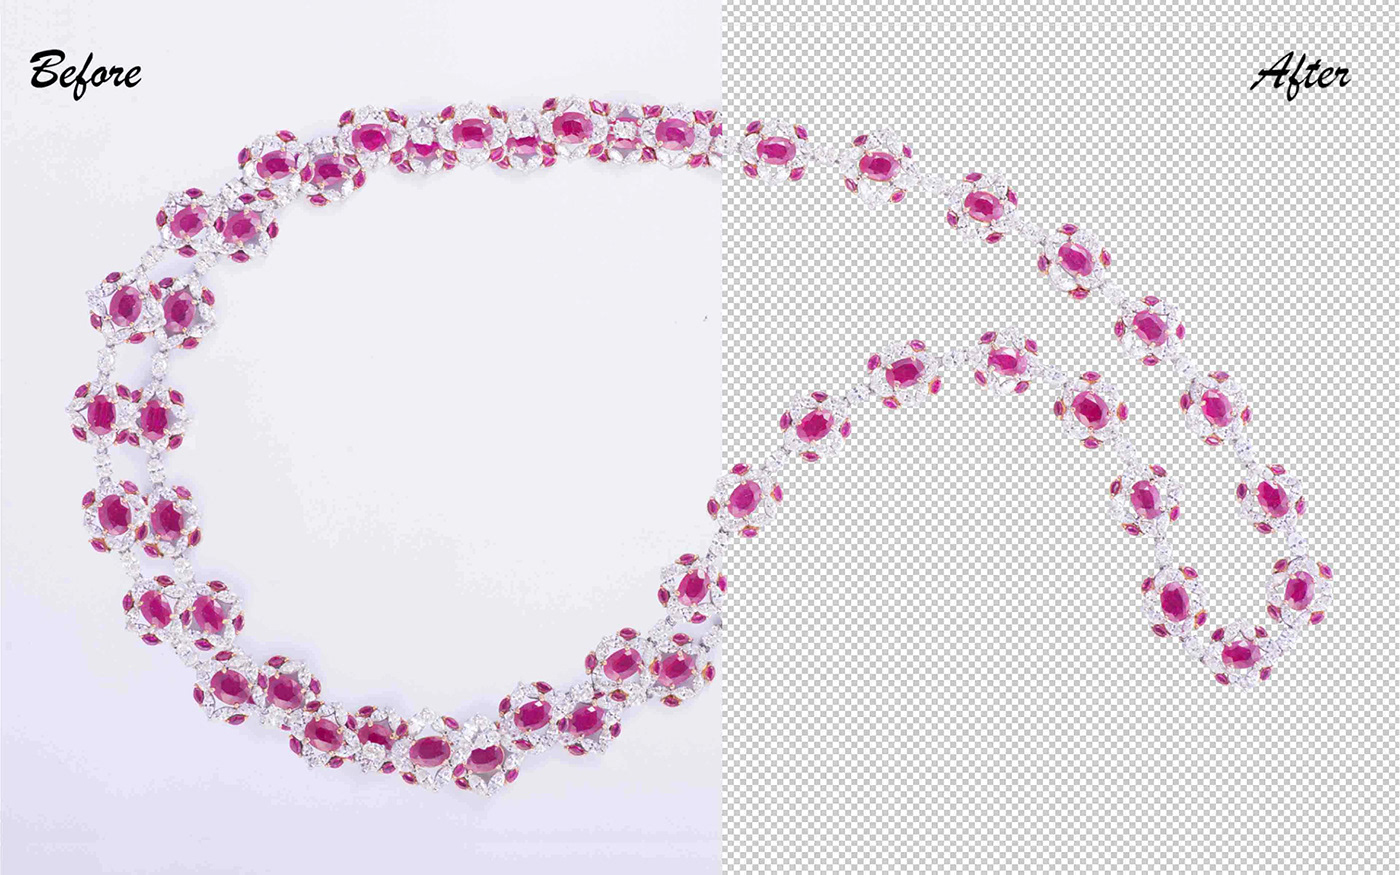 Clipping path color correction Image Editing photoshop